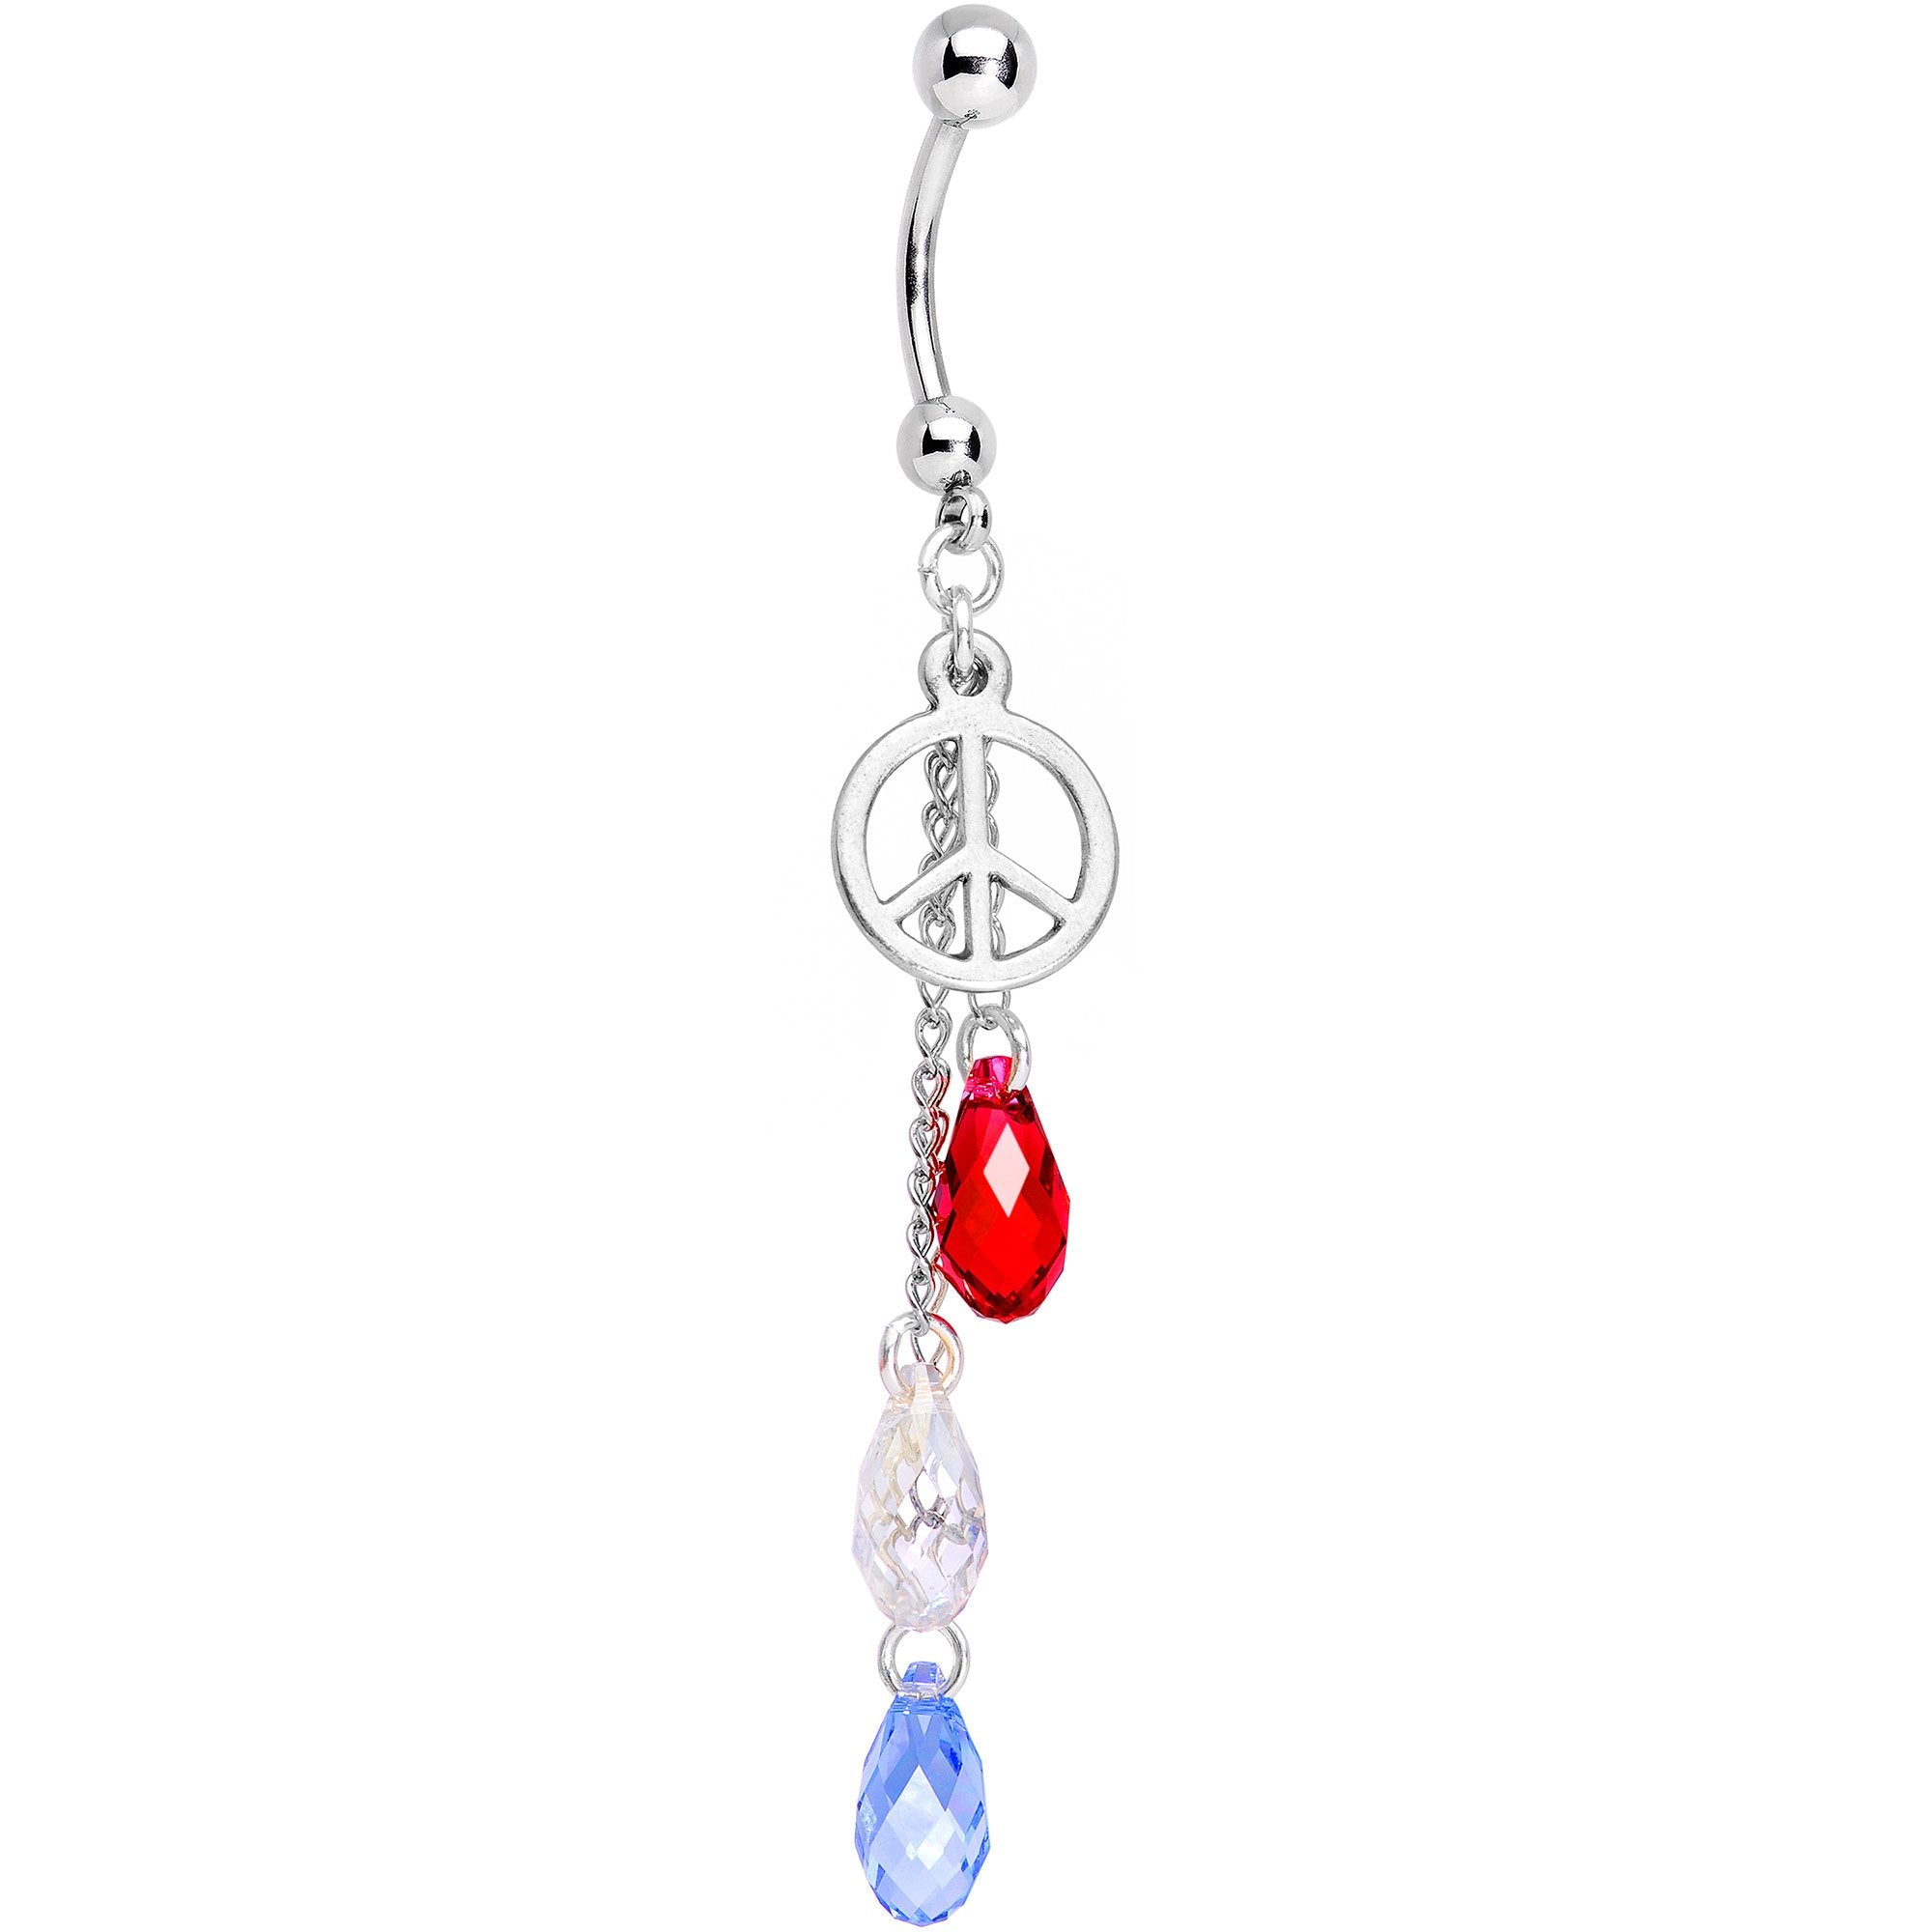 American Peace Reversible Belly Ring Created with Crystals